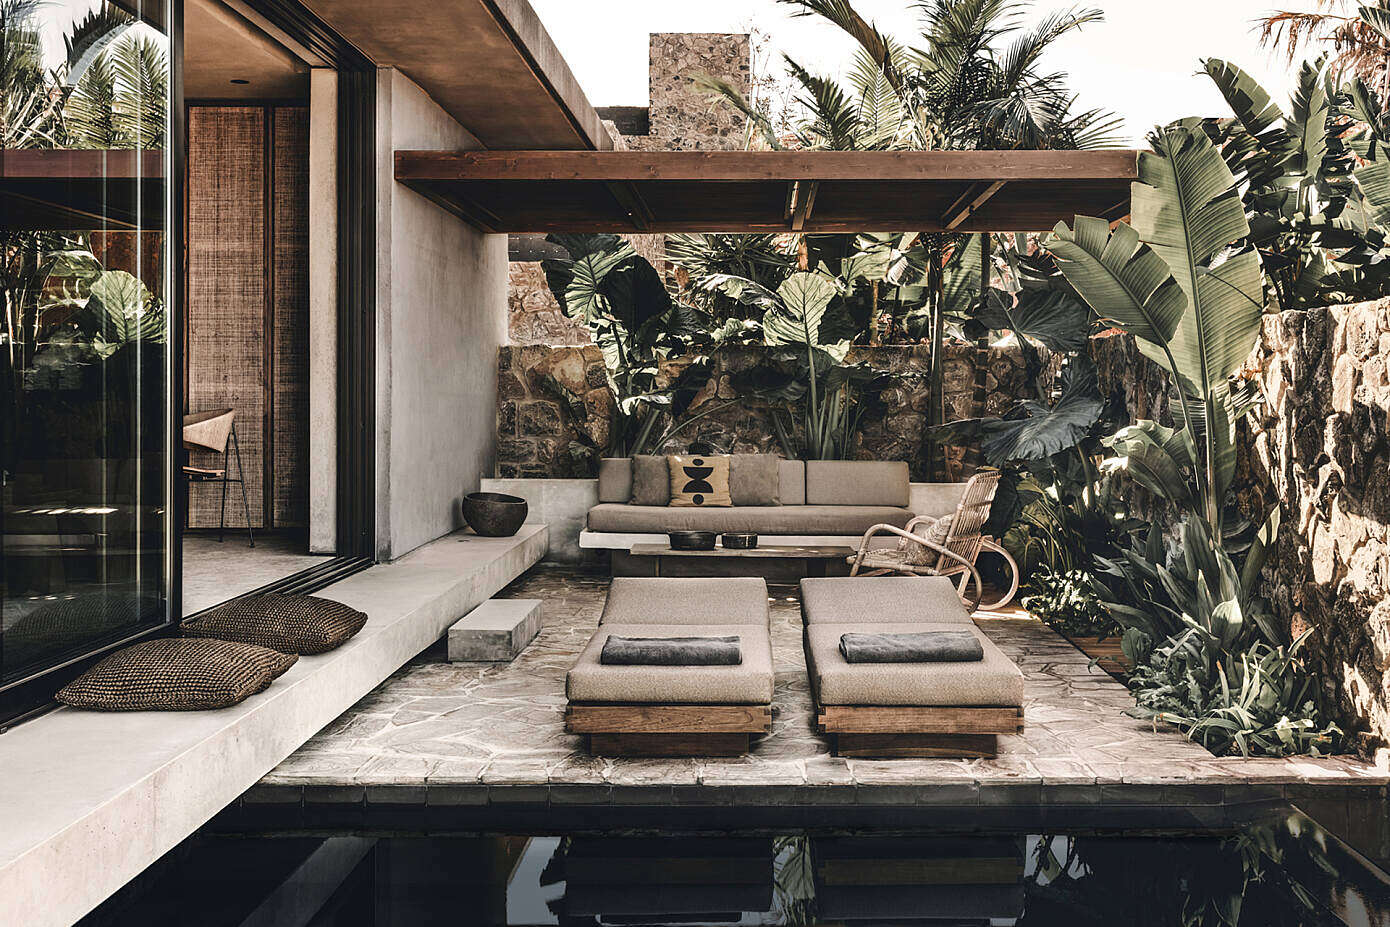 Casa Cook Chania by Lambs & Lions